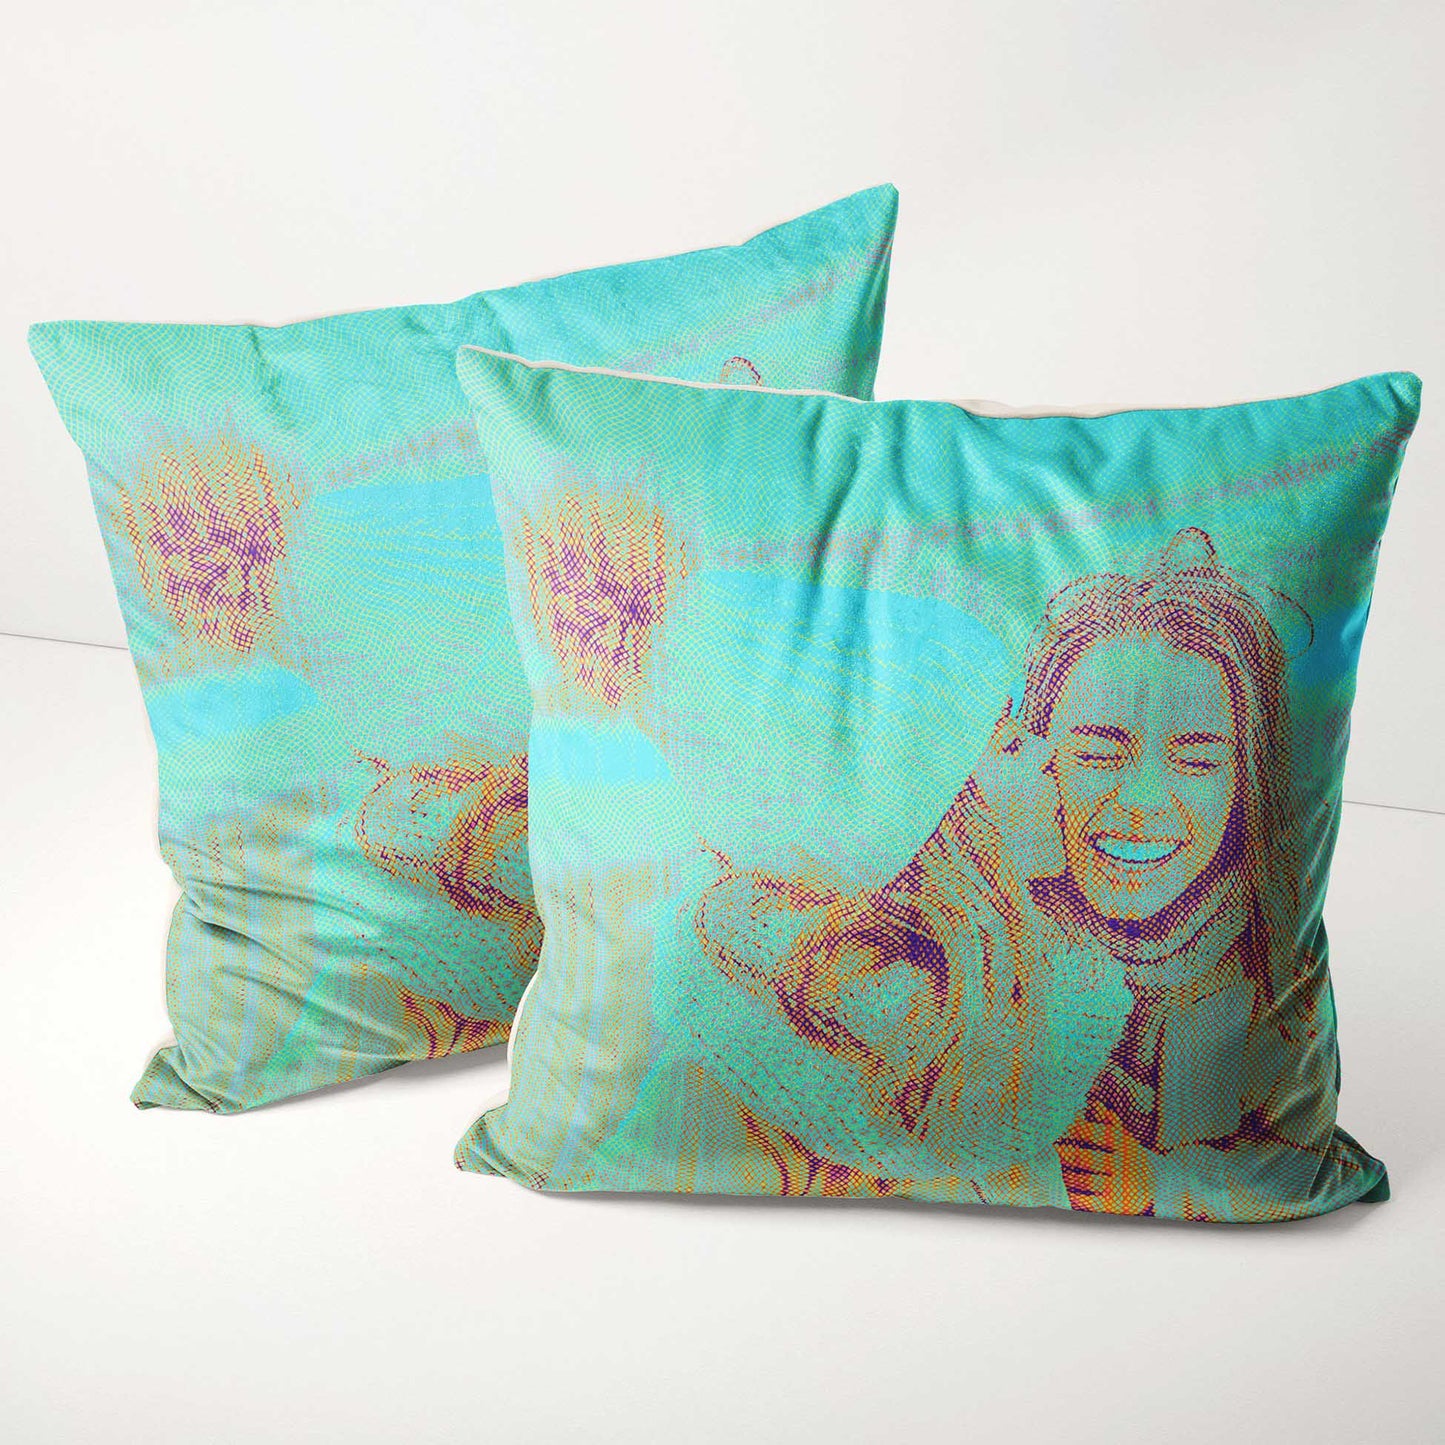 Add a touch of personality to your space with the Personalised Blue Engraved Cushion. Crafted from soft velvet fabric, this cool and fresh cushion allows you to create a fun and customised piece by printing your photo. Handmade with care